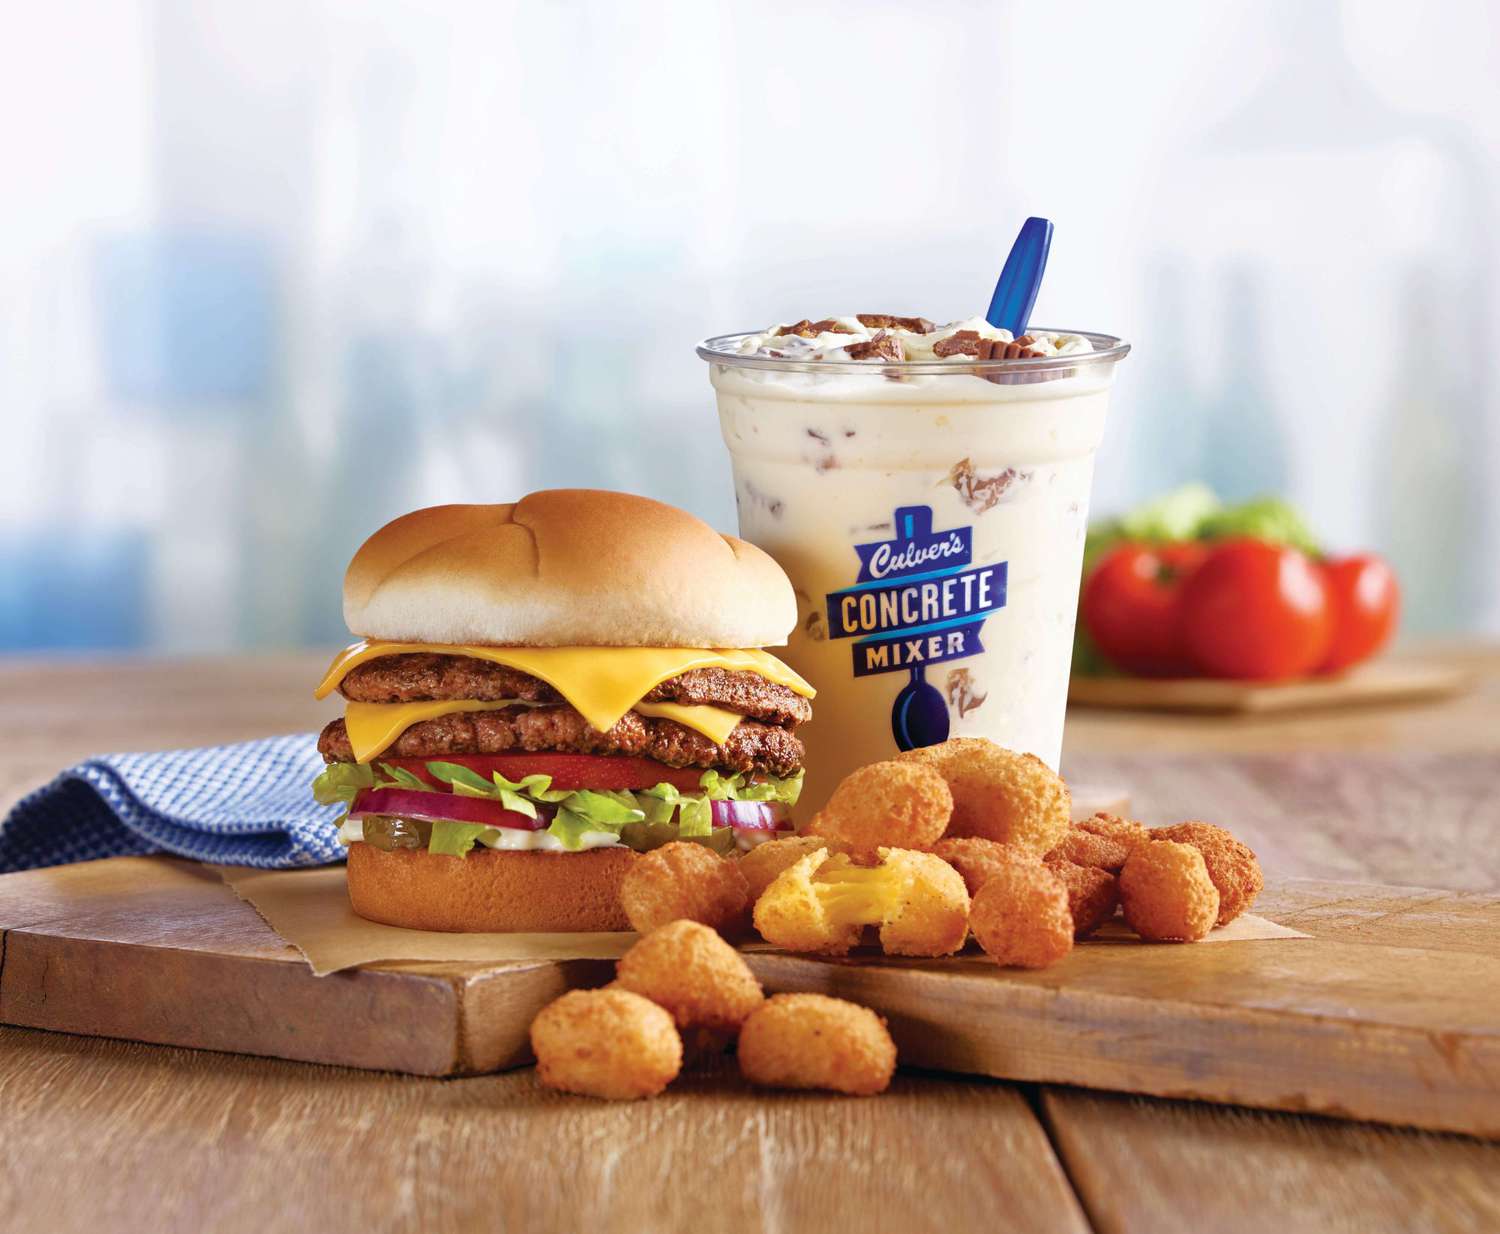 Culver’s ButterBurger and Concrete Mixer with cheese curds